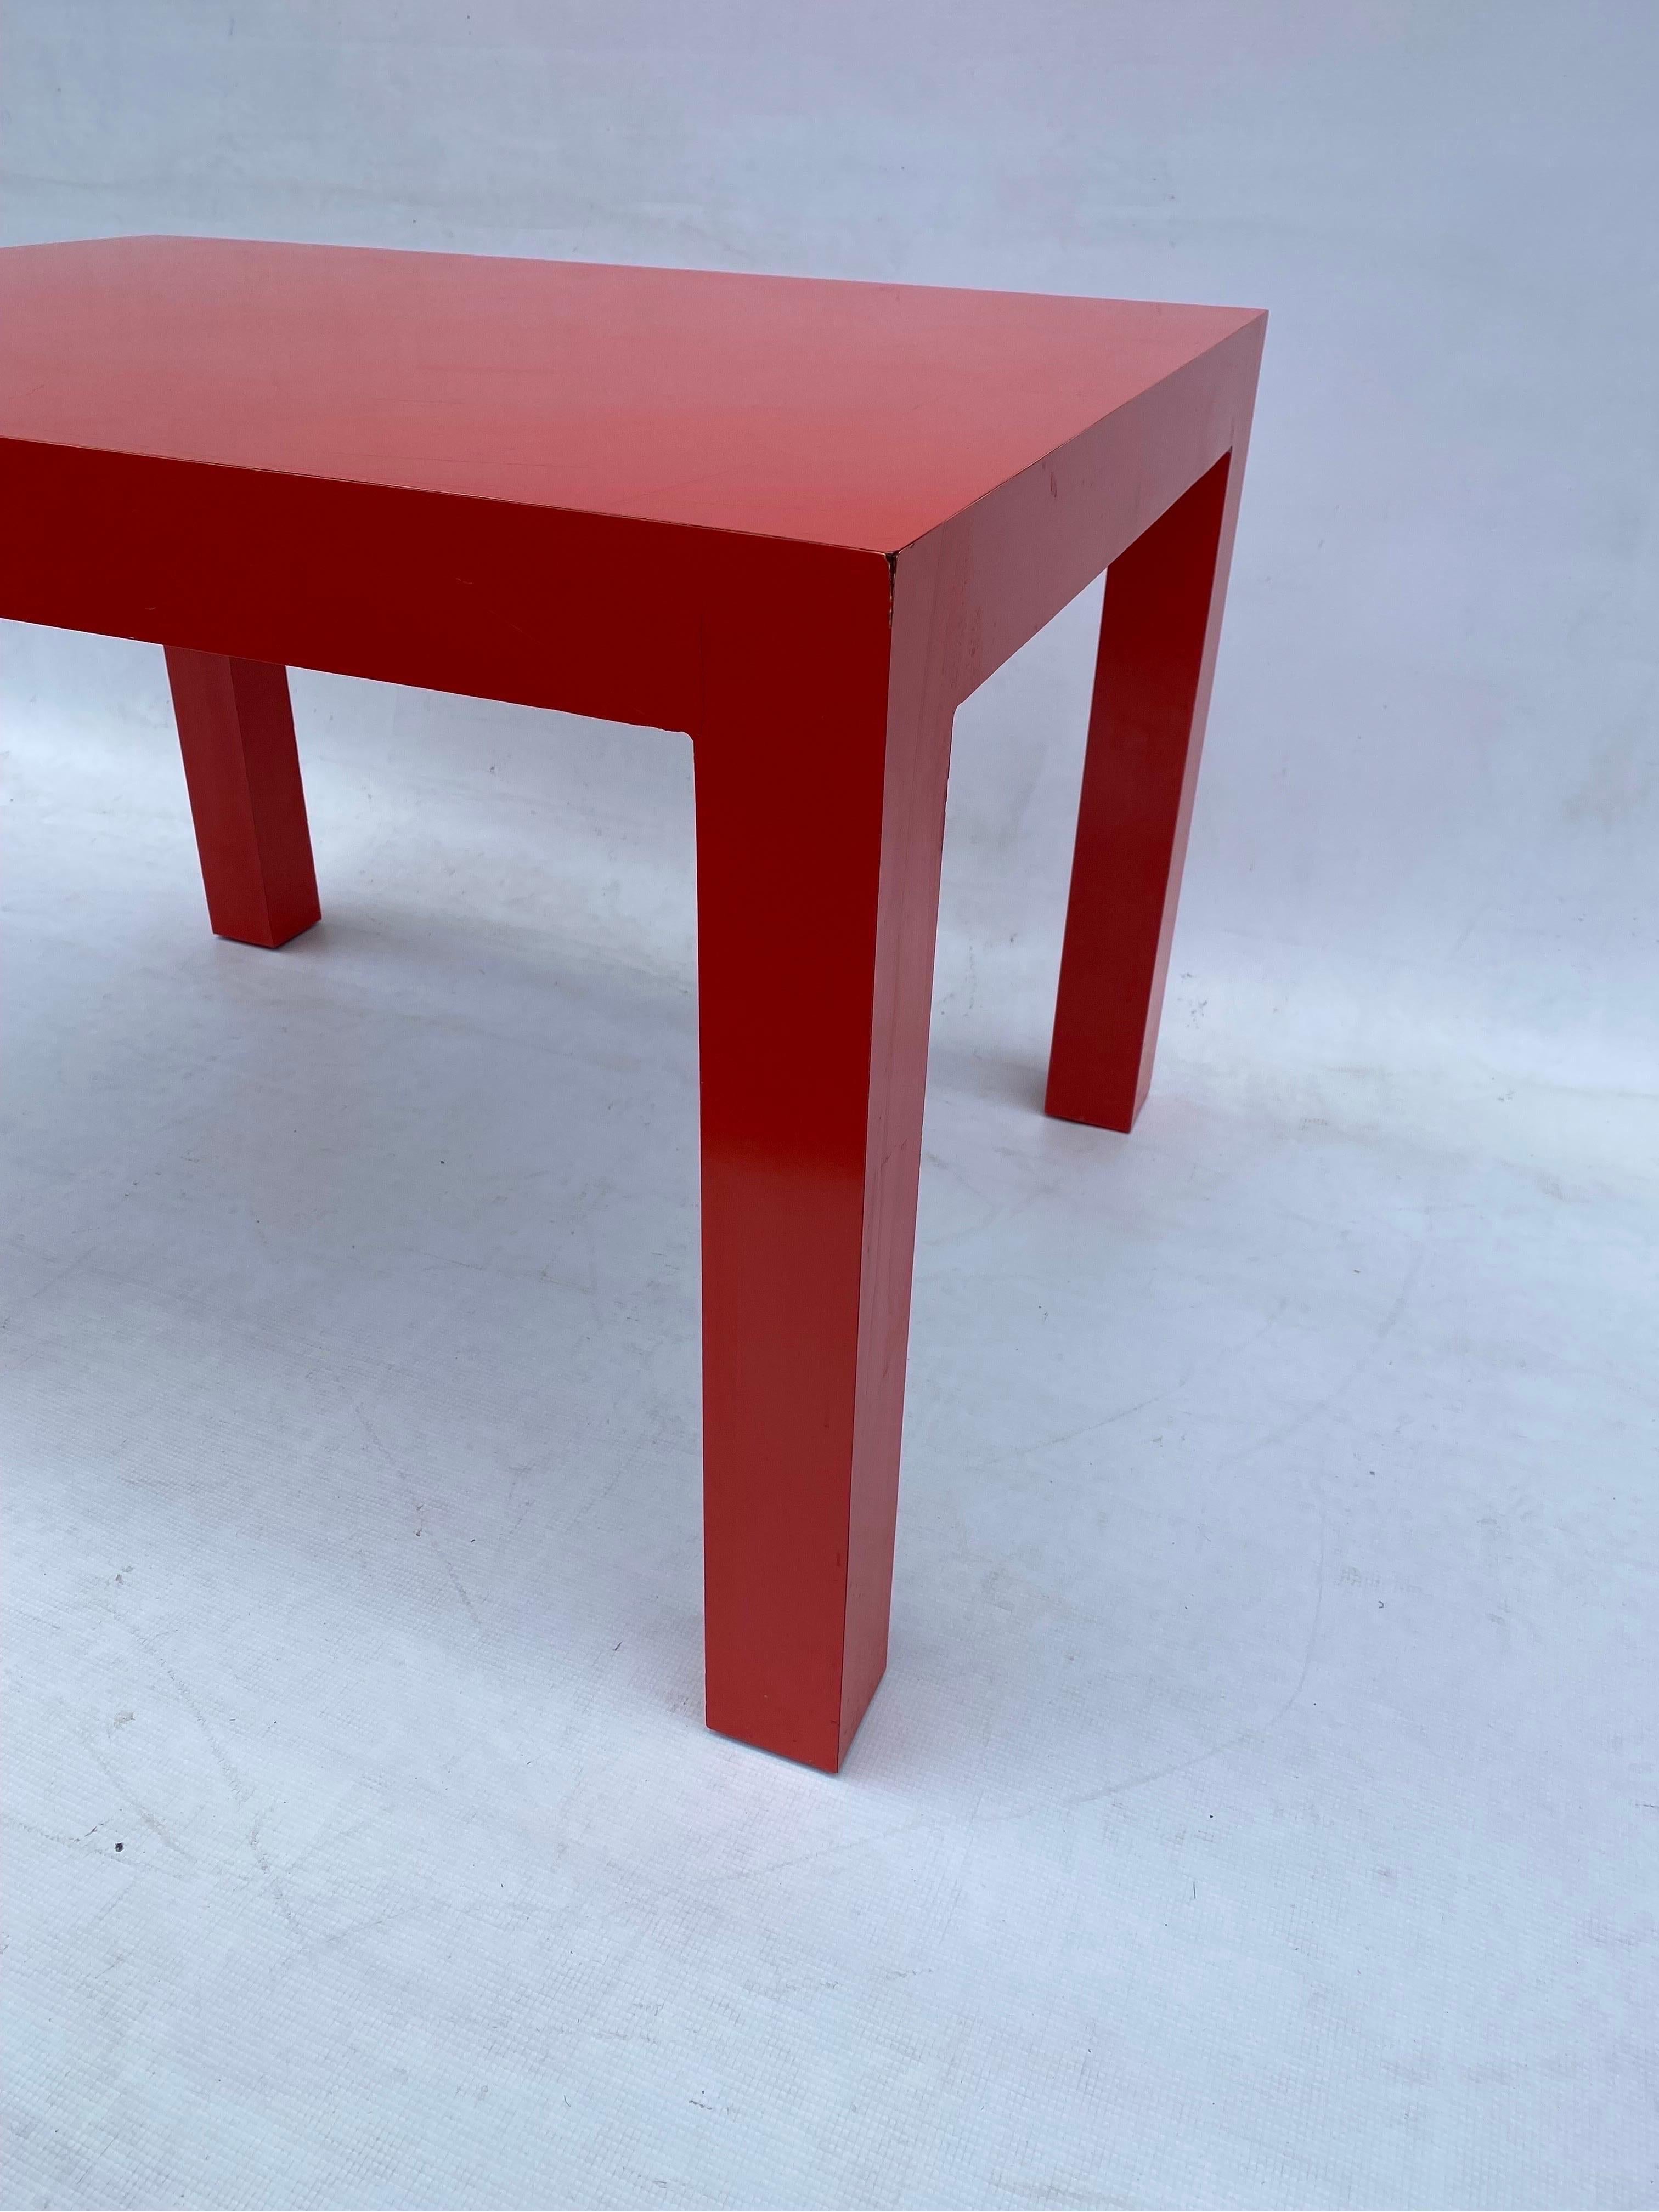 Milo Baughman for Thayer Coggin Formica Red Side Coffee Table 1960s Mid Century  For Sale 4